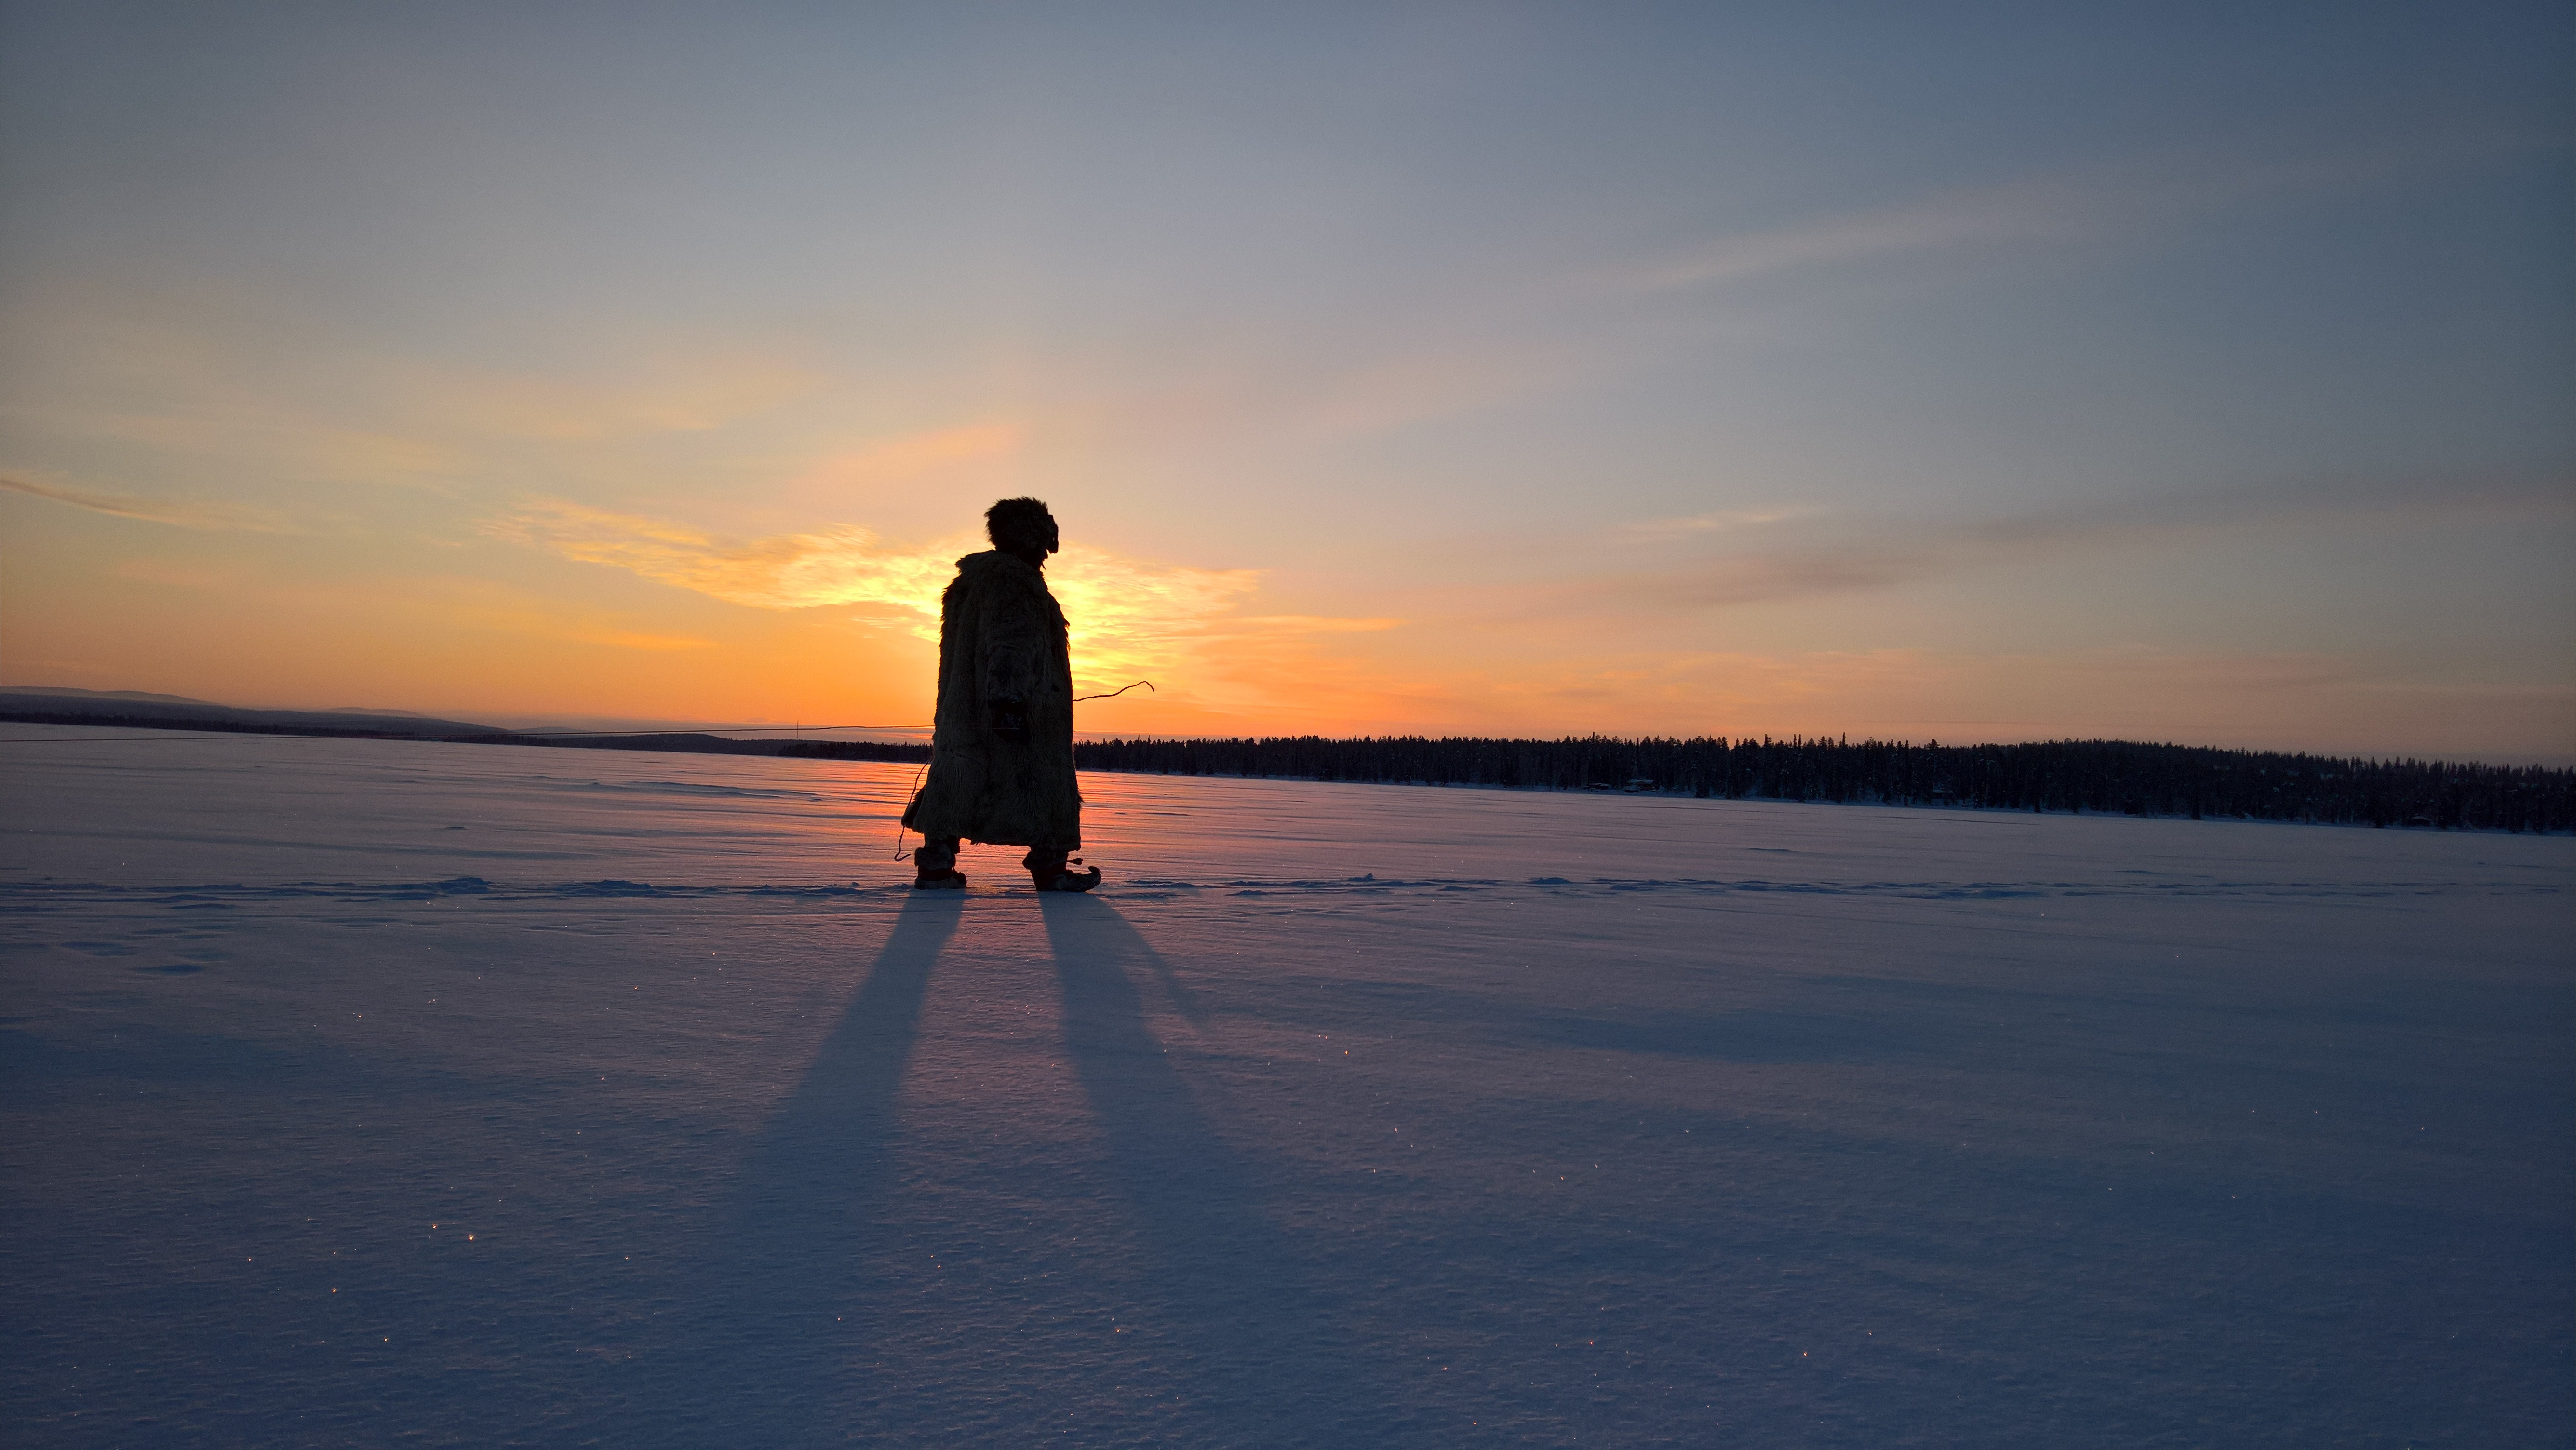 A Lapland Shaman on the lake near his home in Levi, Finland. He has spent his life in this landscape hunting, fishing, and understanding the extreme north. Shot with Lumia 950, by Stephen Alvarez.